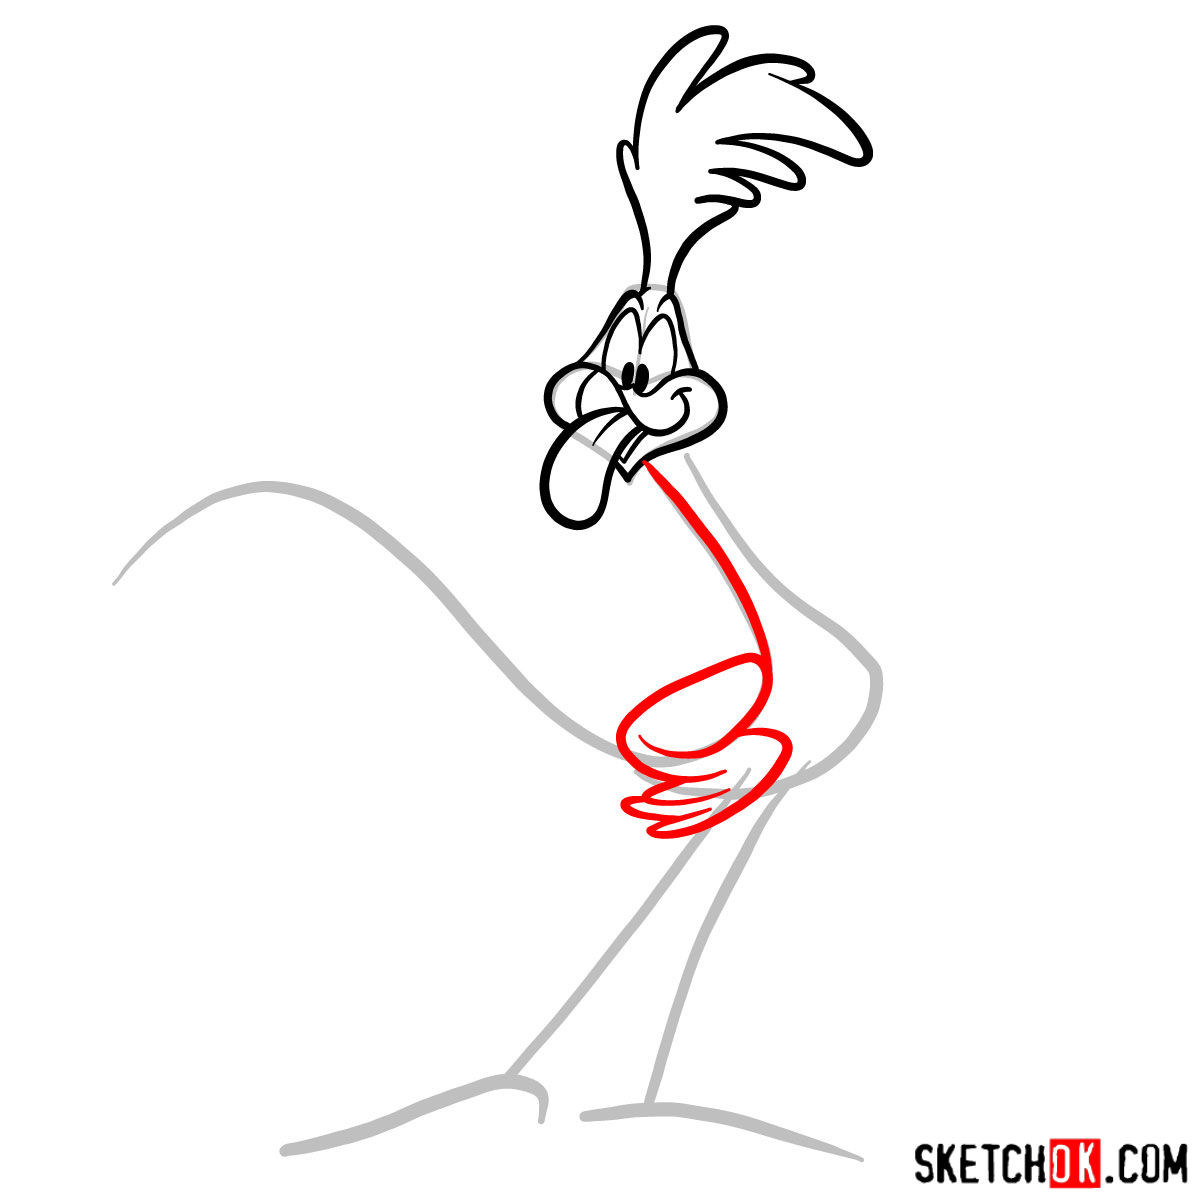 How to draw the Road Runner - step 04